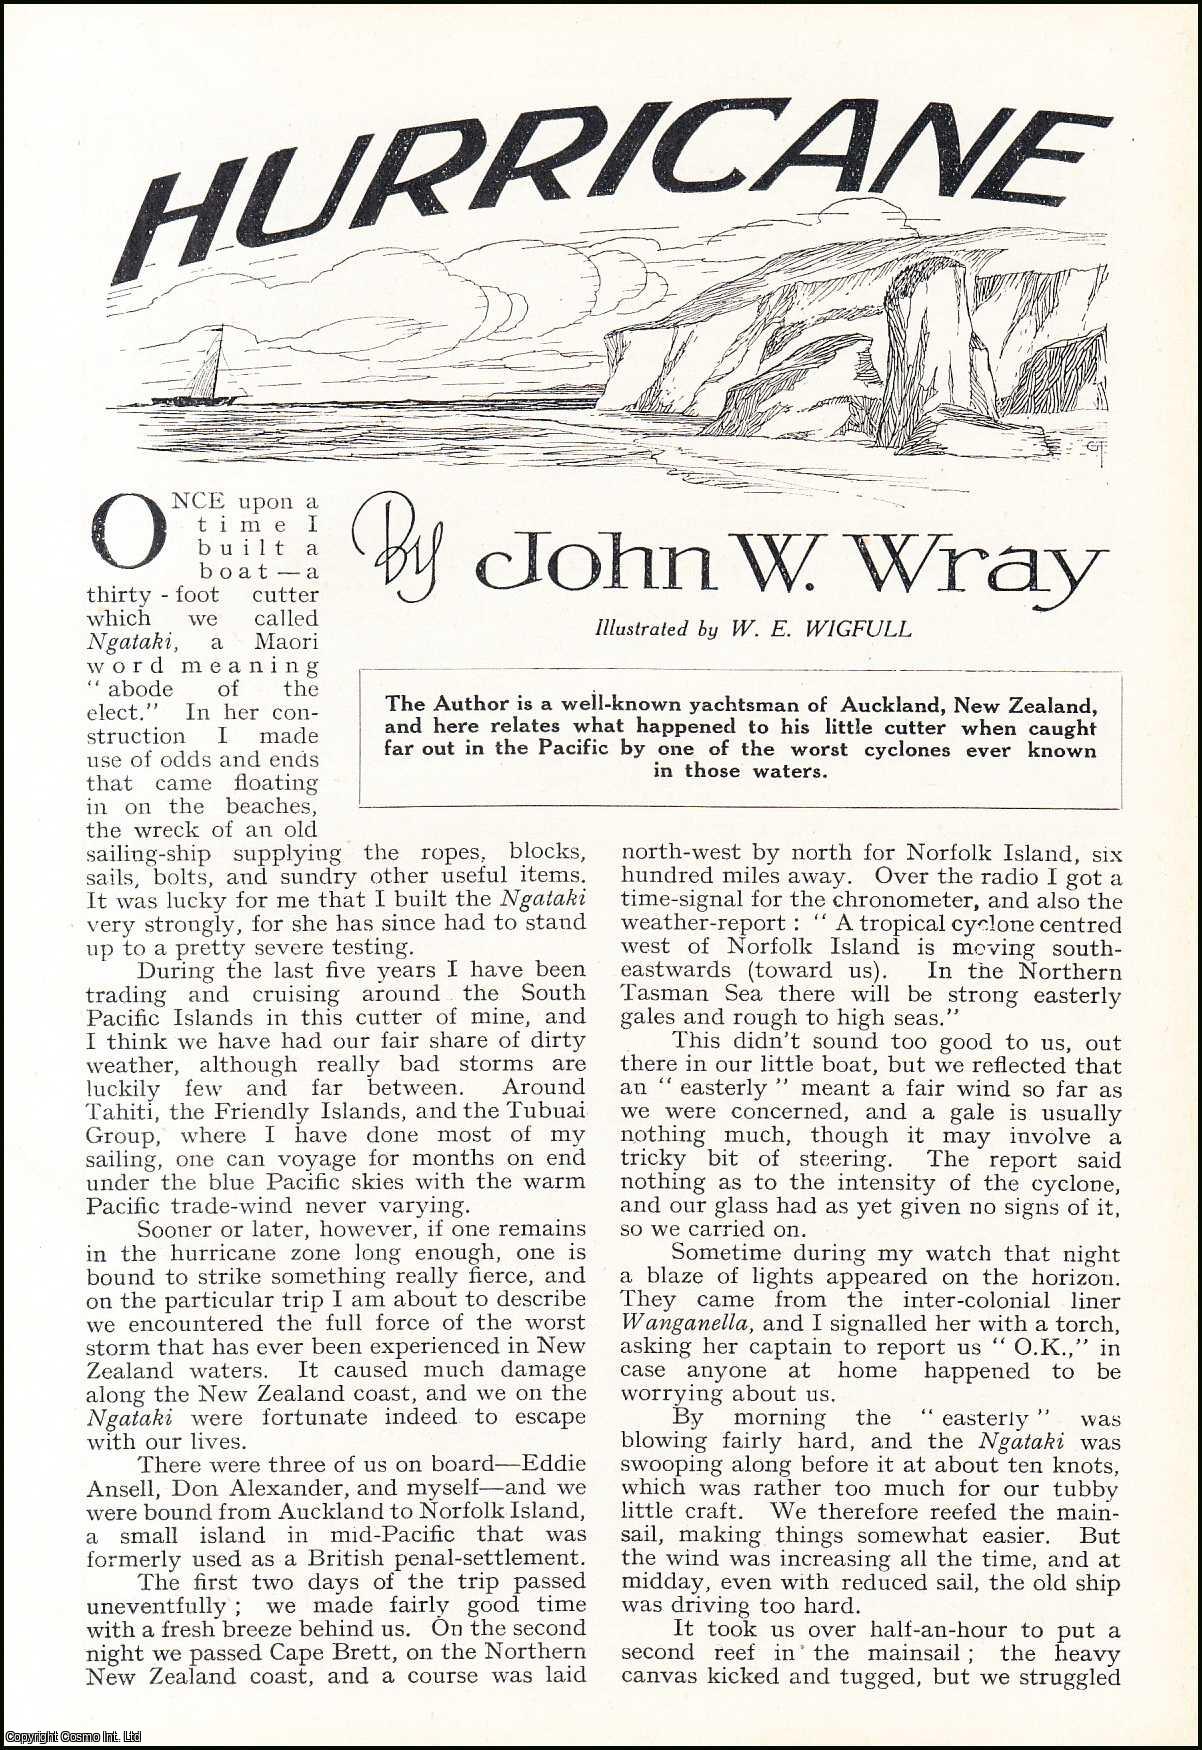 John W. Wray, illustrated by W.E. Wigfull. - Hurricane : a story of a yachtsman of Auckland, New Zealand out in the Pacific. An uncommon original article from the Wide World Magazine, 1938.